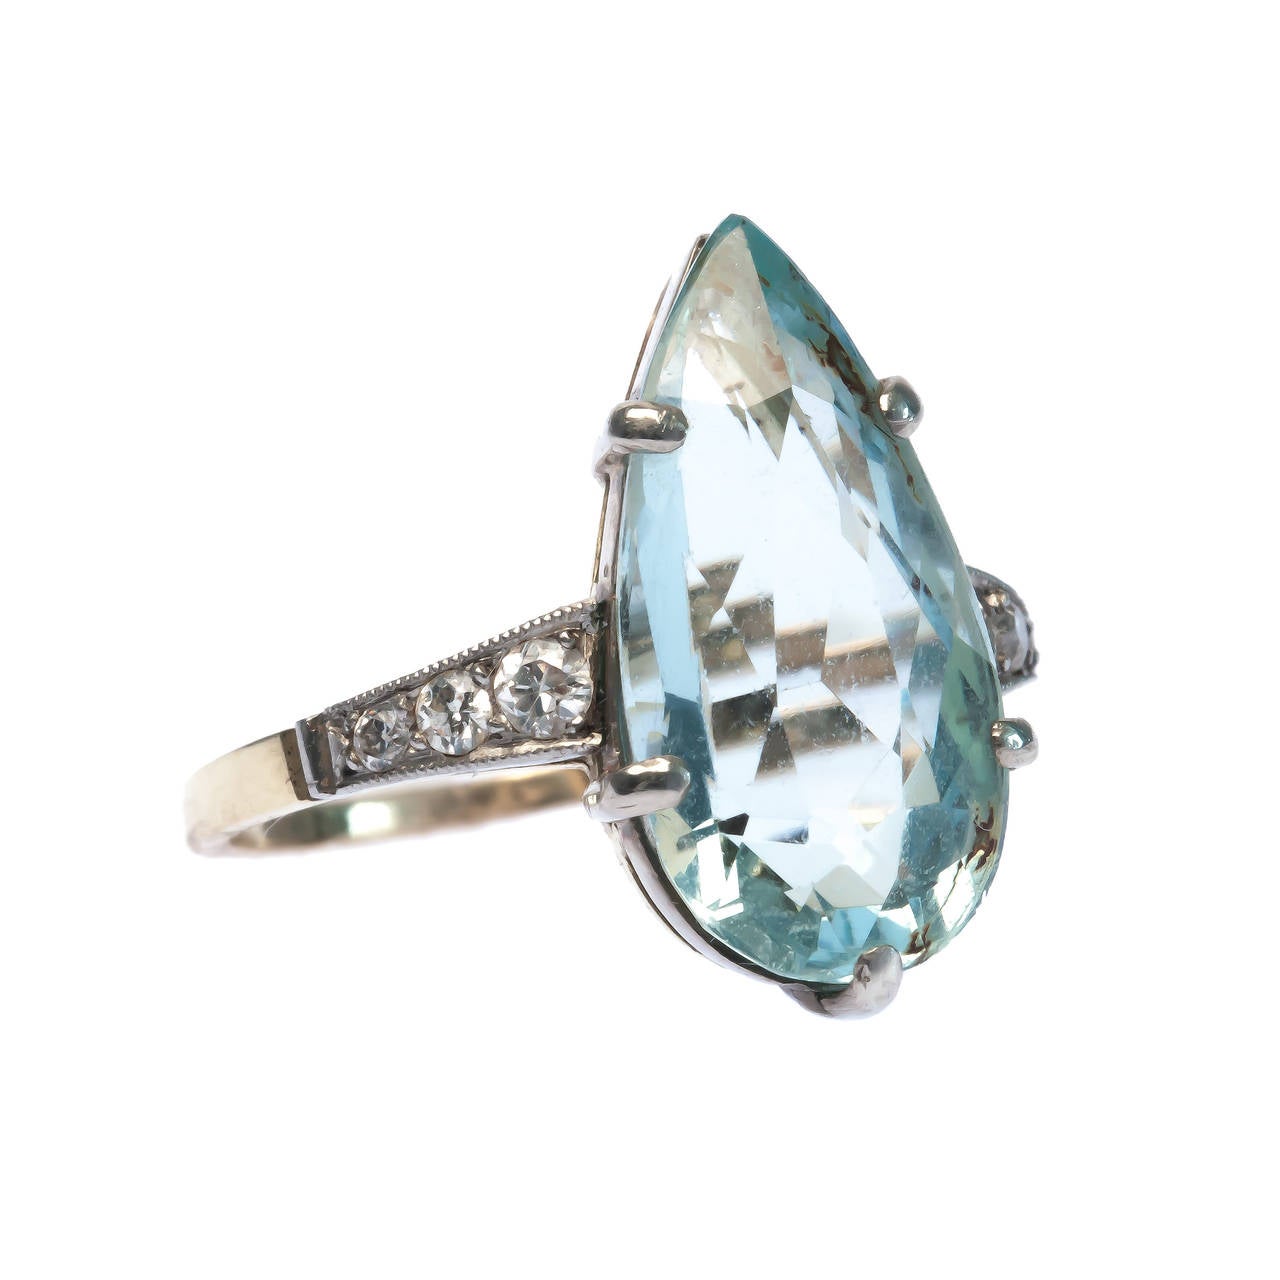 Seychelles is a striking Late Art Deco platinum topped 18k yellow gold ring centering a four prong set 5.78ct pear shaped aquamarine flanked on either side by six Old European Cut diamonds totaling approximately 0.20ct. Seychelles is delicately